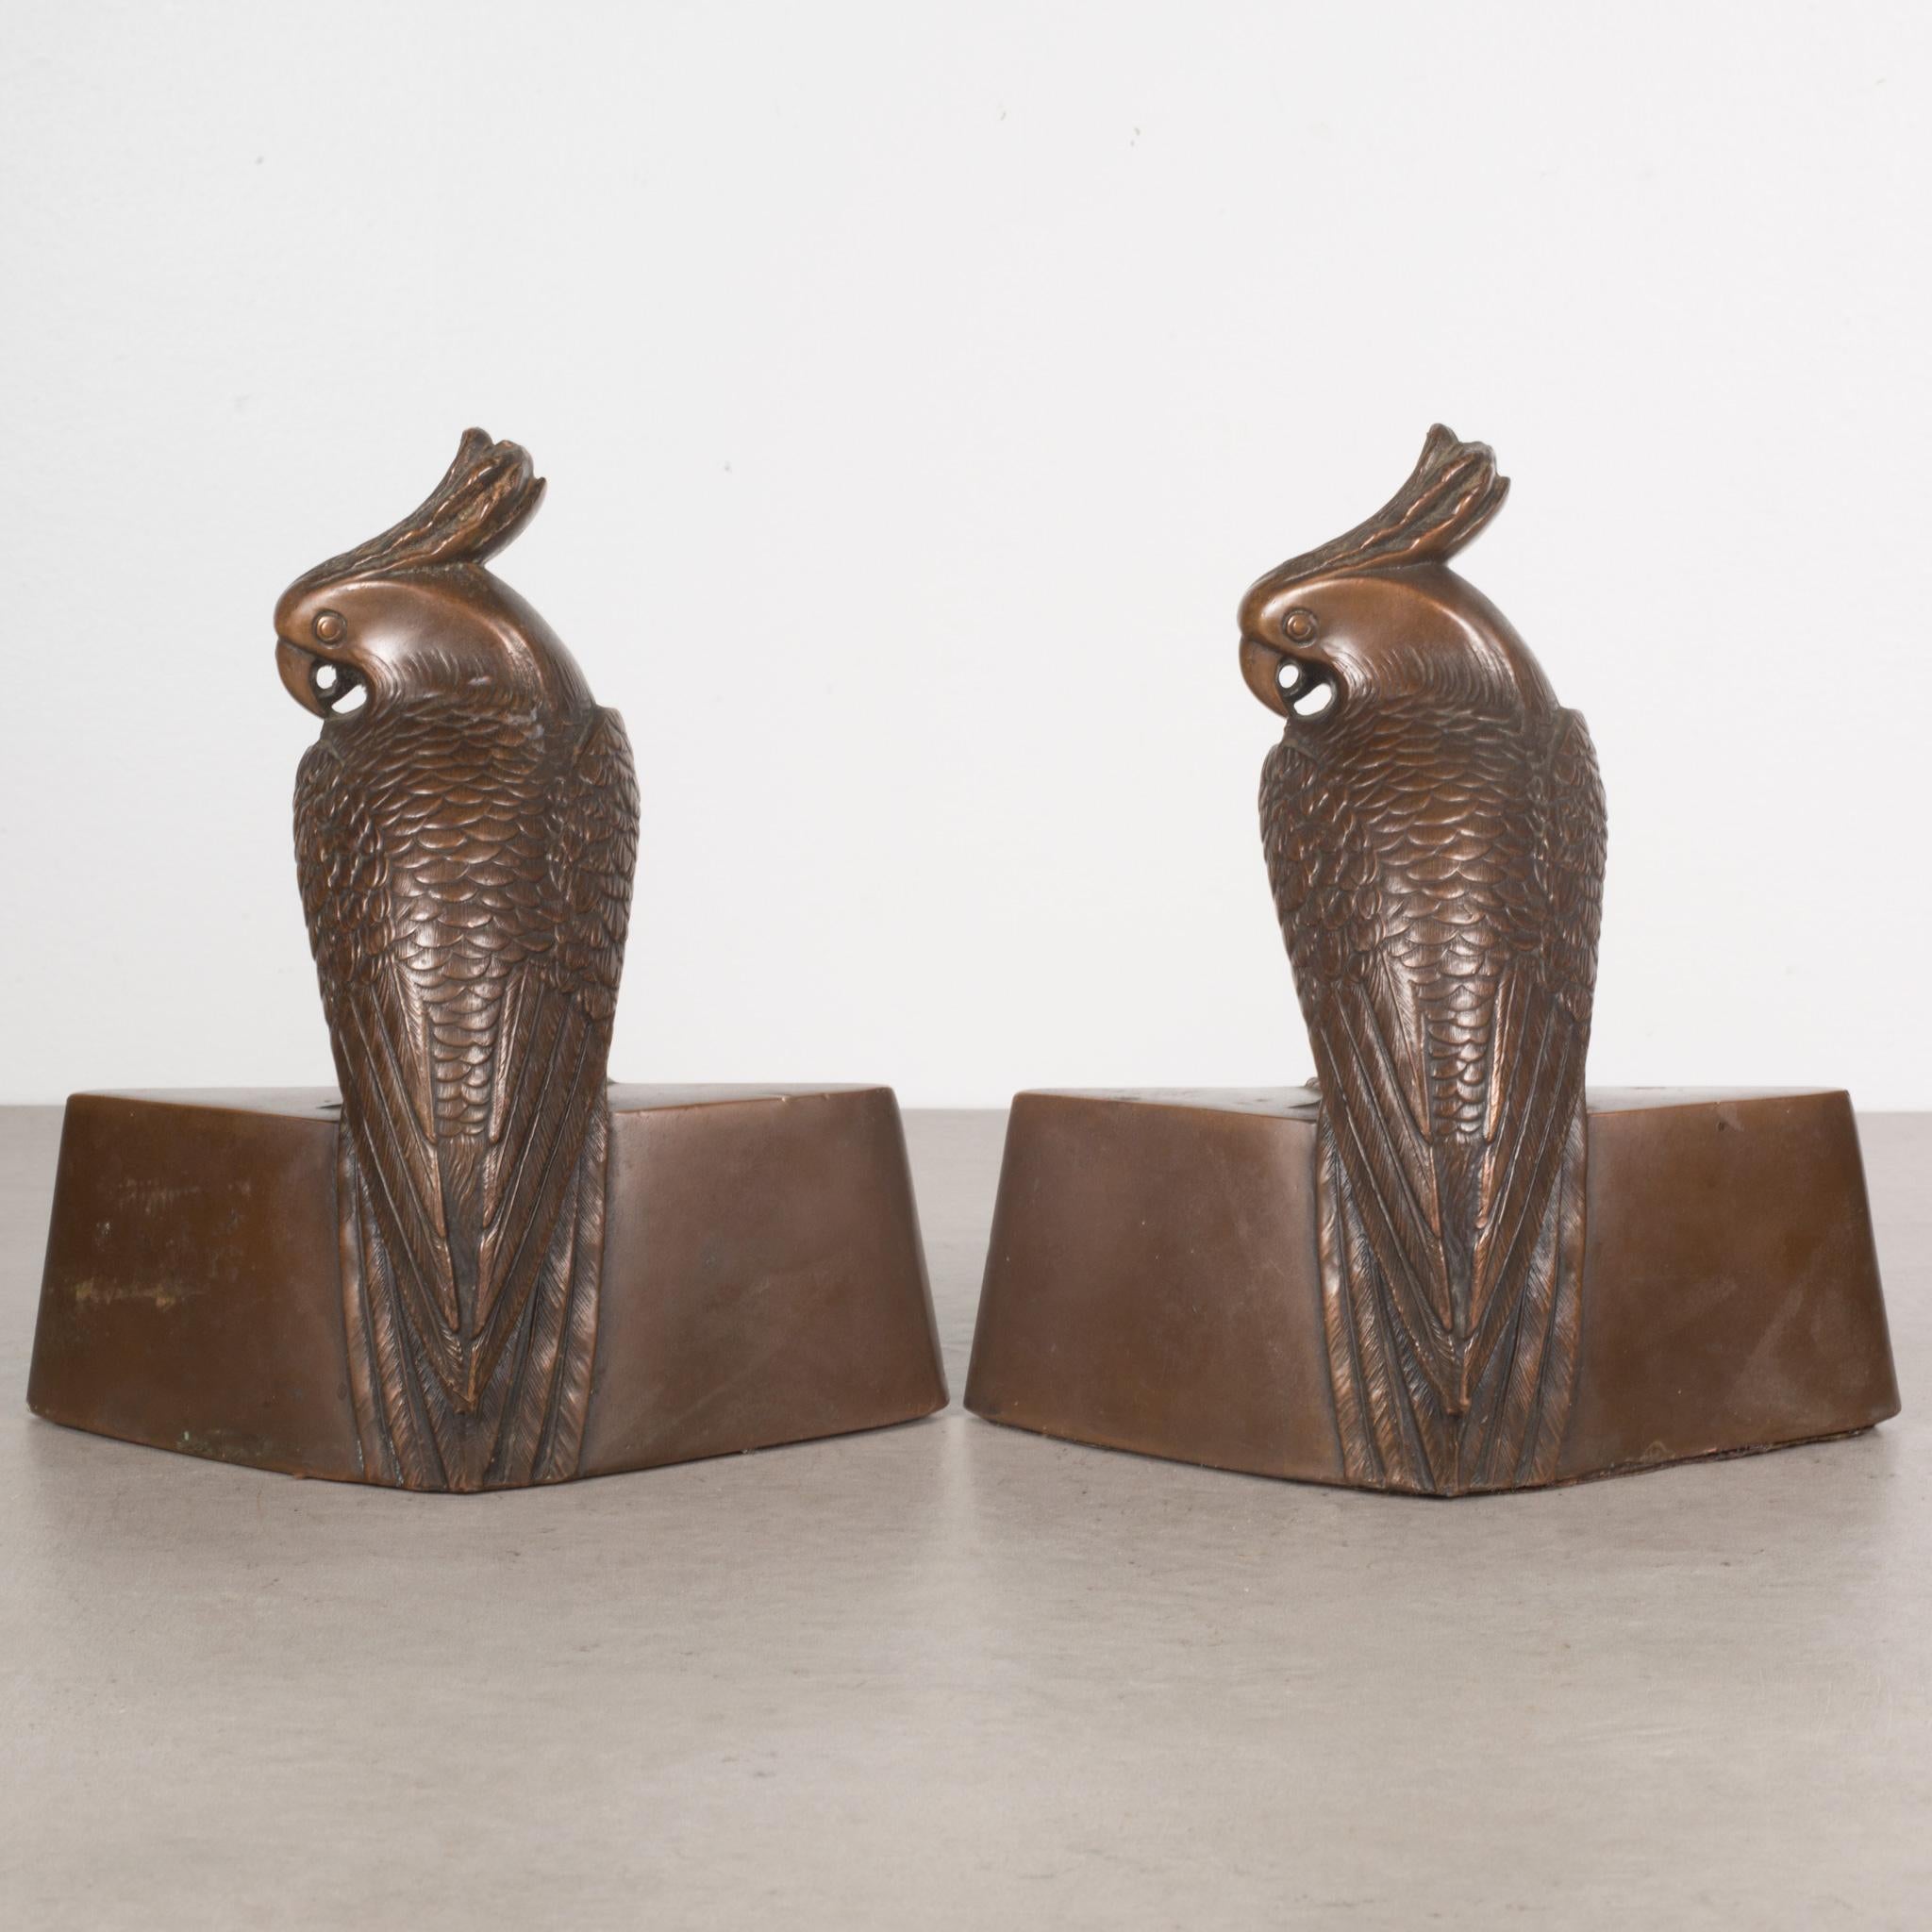 American Rare Jennings Brothers Bronze Plated Parrot Bookends c.1920